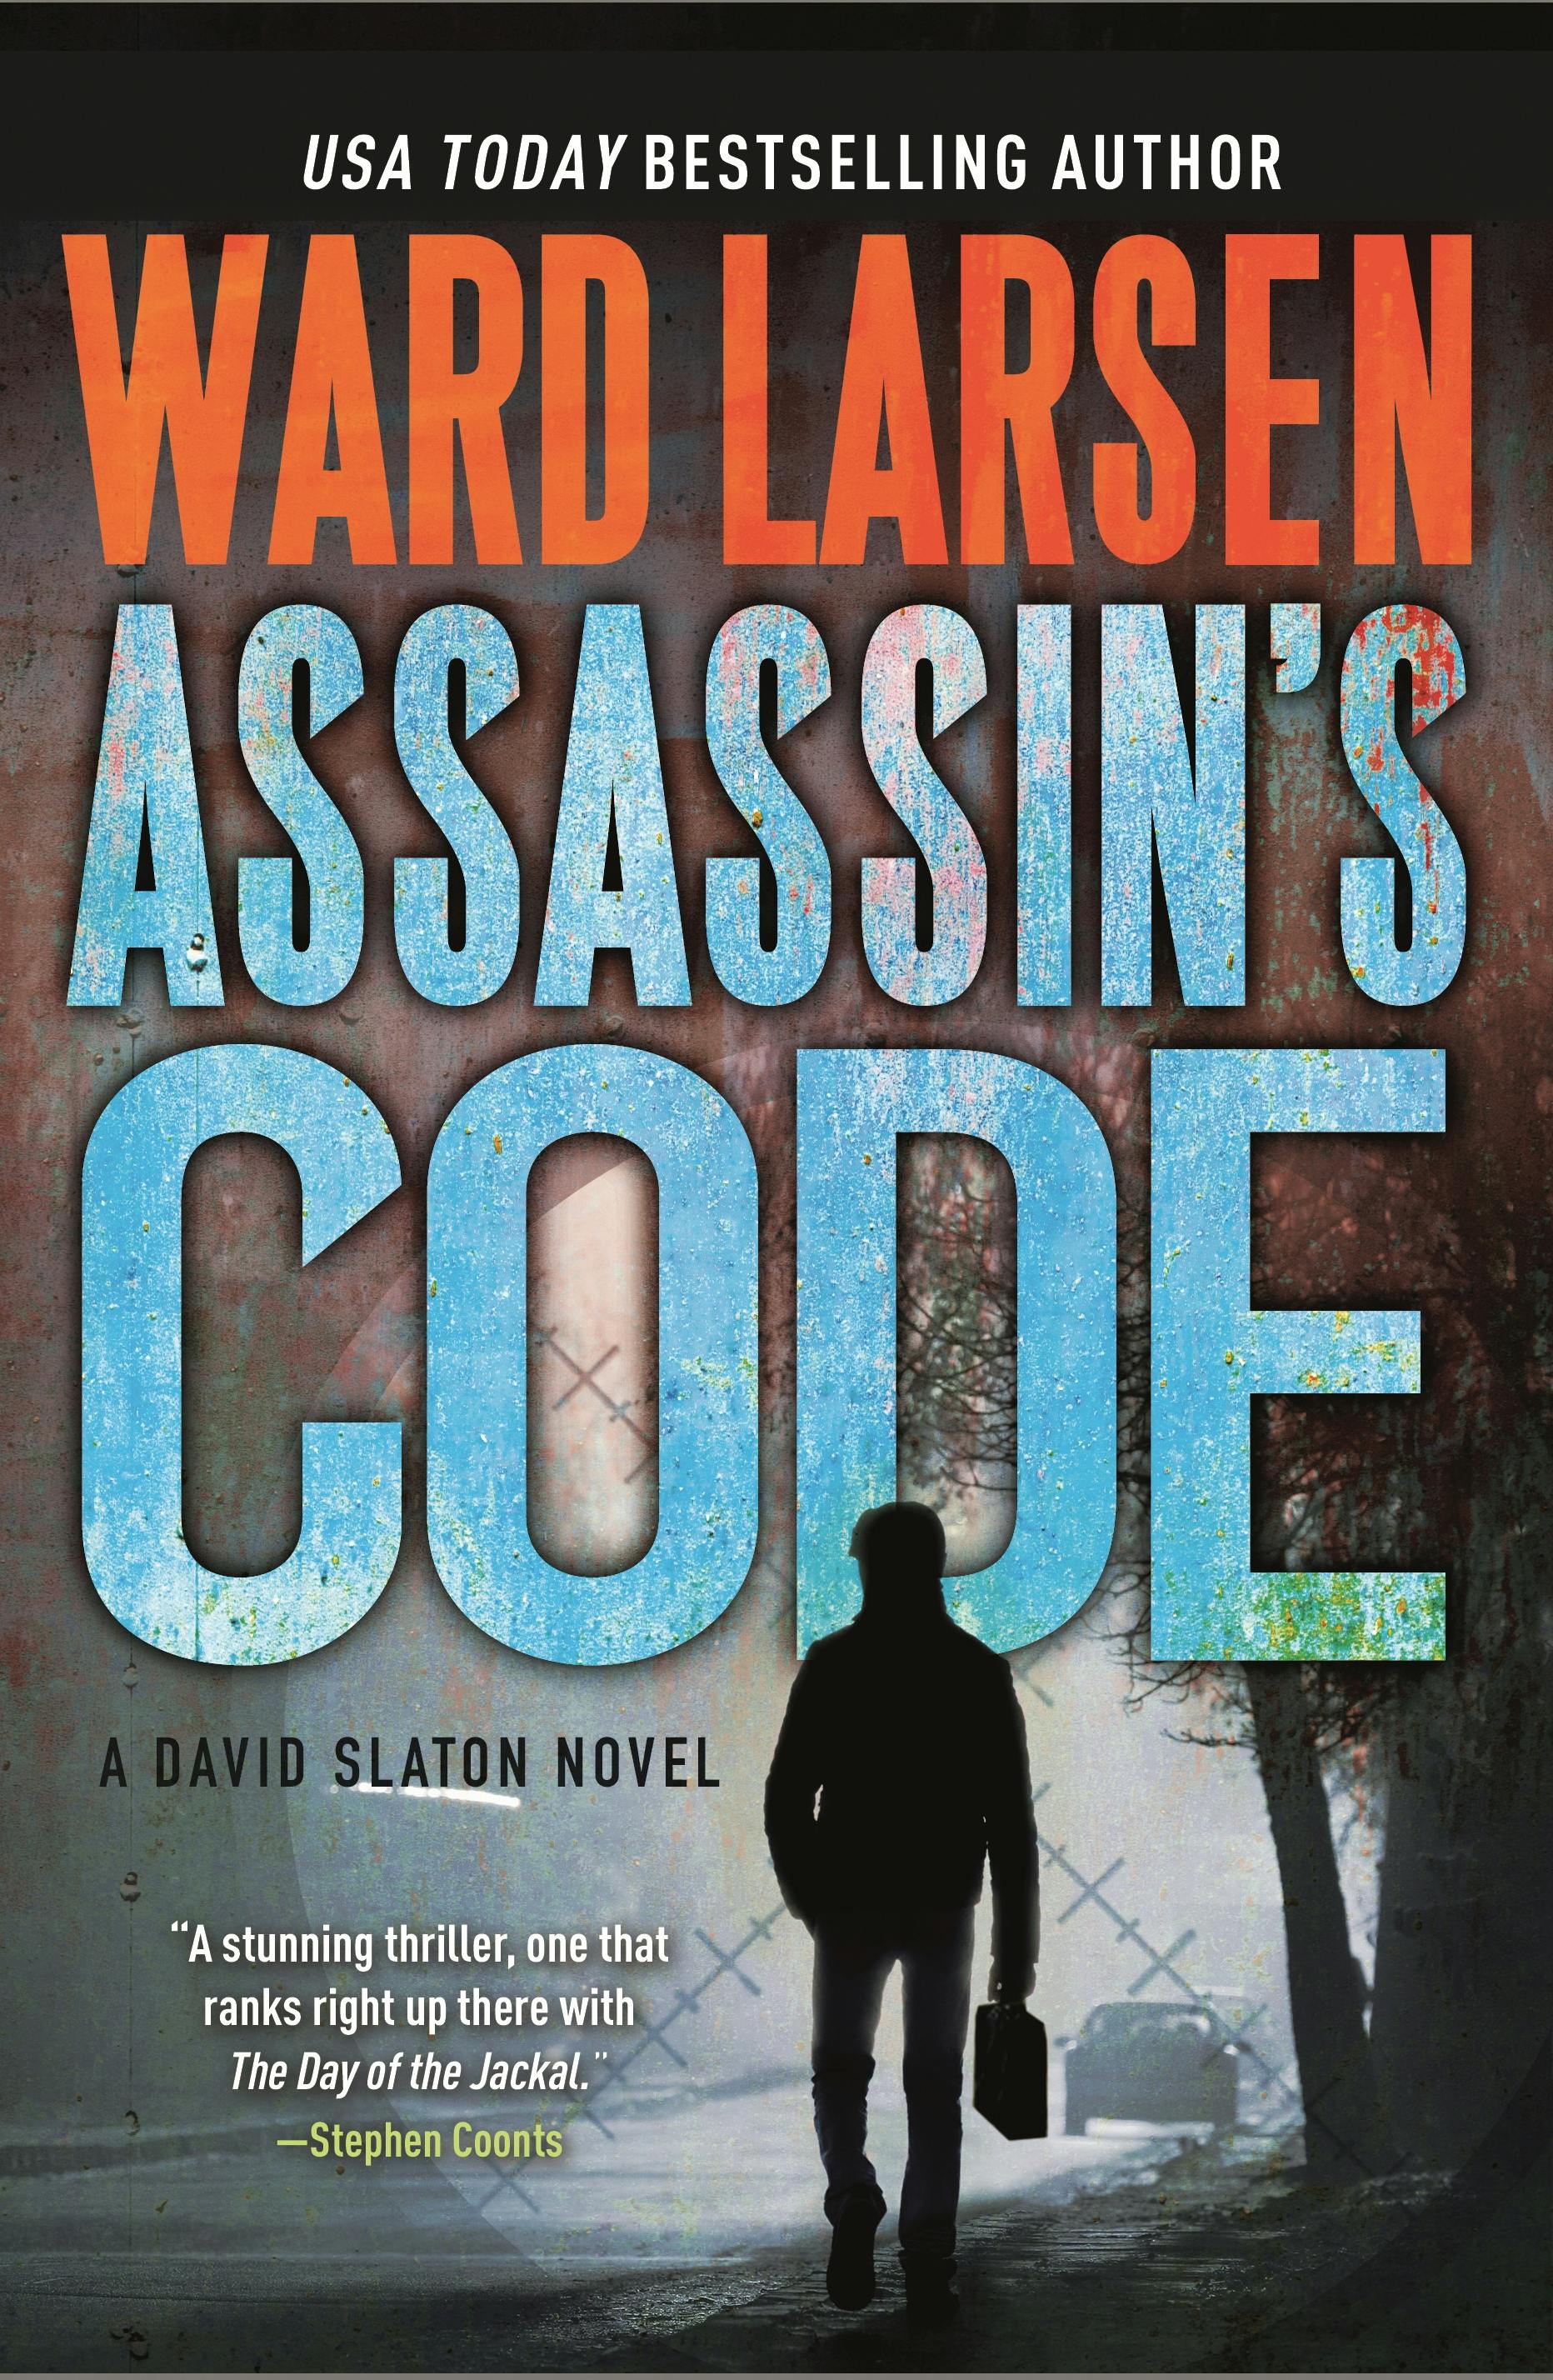 Cover for the book titled as: Assassin's Code